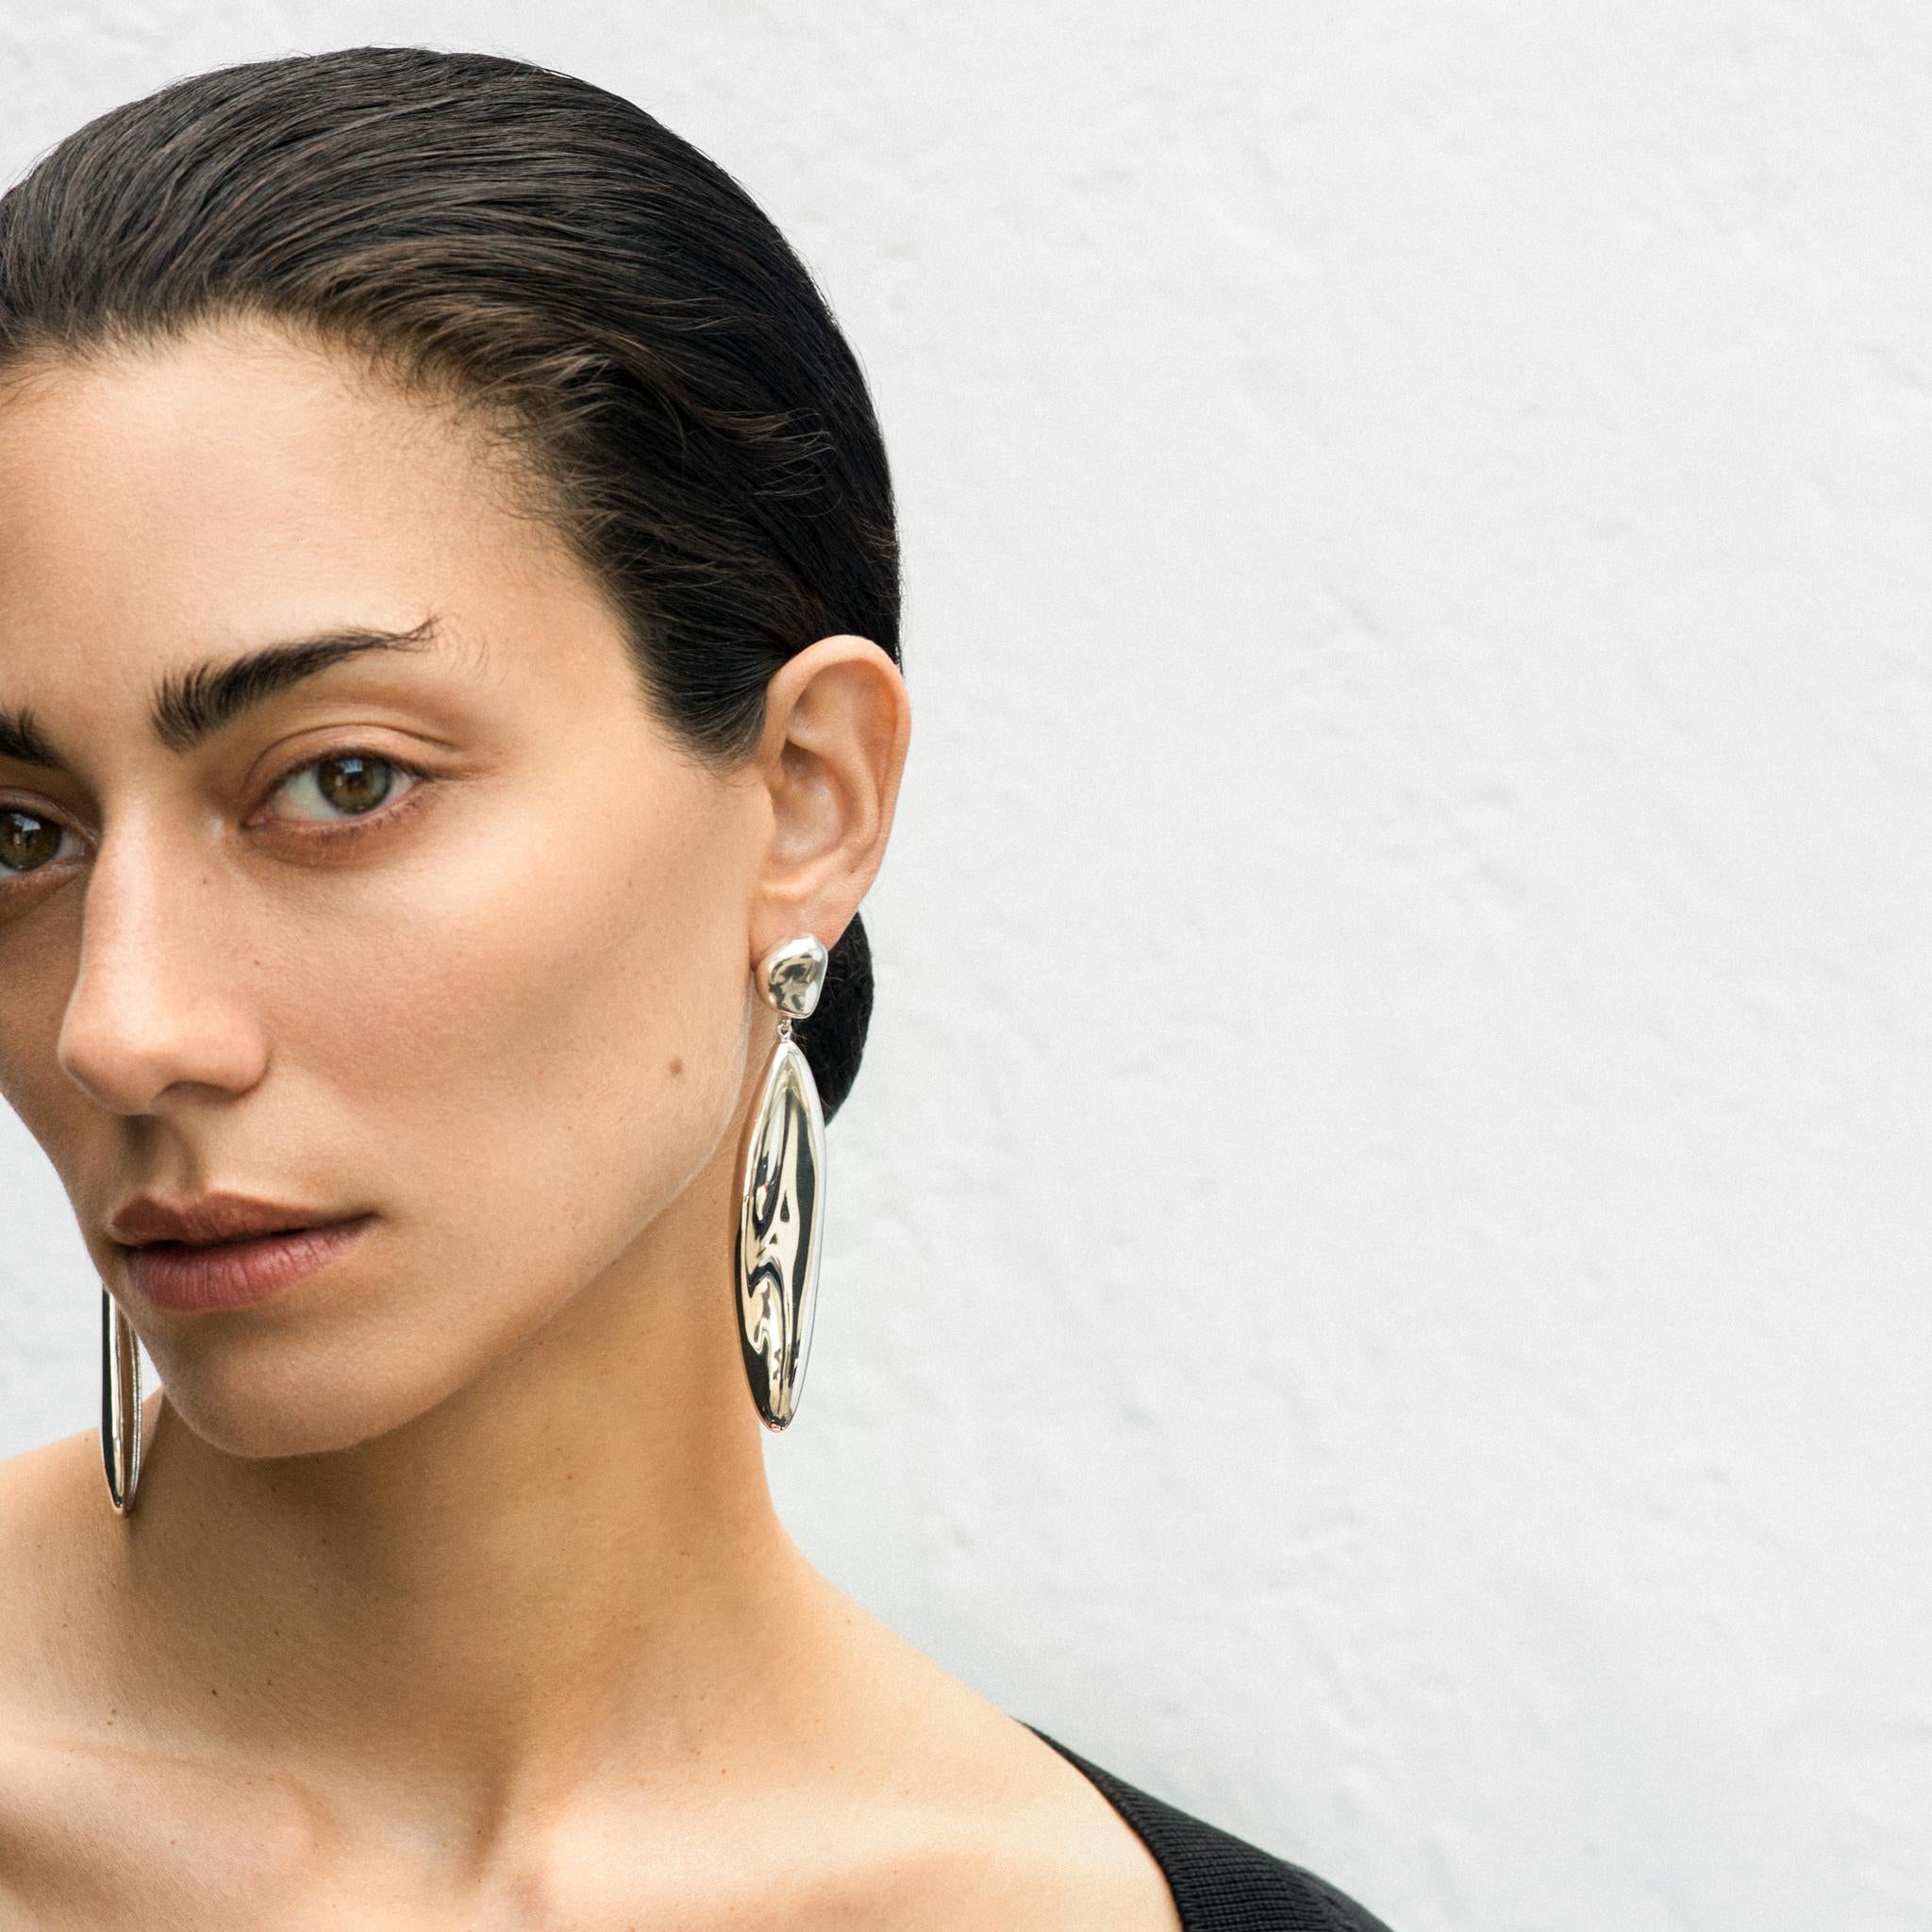 AGMES Long Drop Sterling Silver Statement Earrings.
Sterling Silver posts.
Also available in short version.  Please see other 1stDibs AGMES listings and contact us for more information.
Handmade in New York City.
Inspired by urban landscapes,